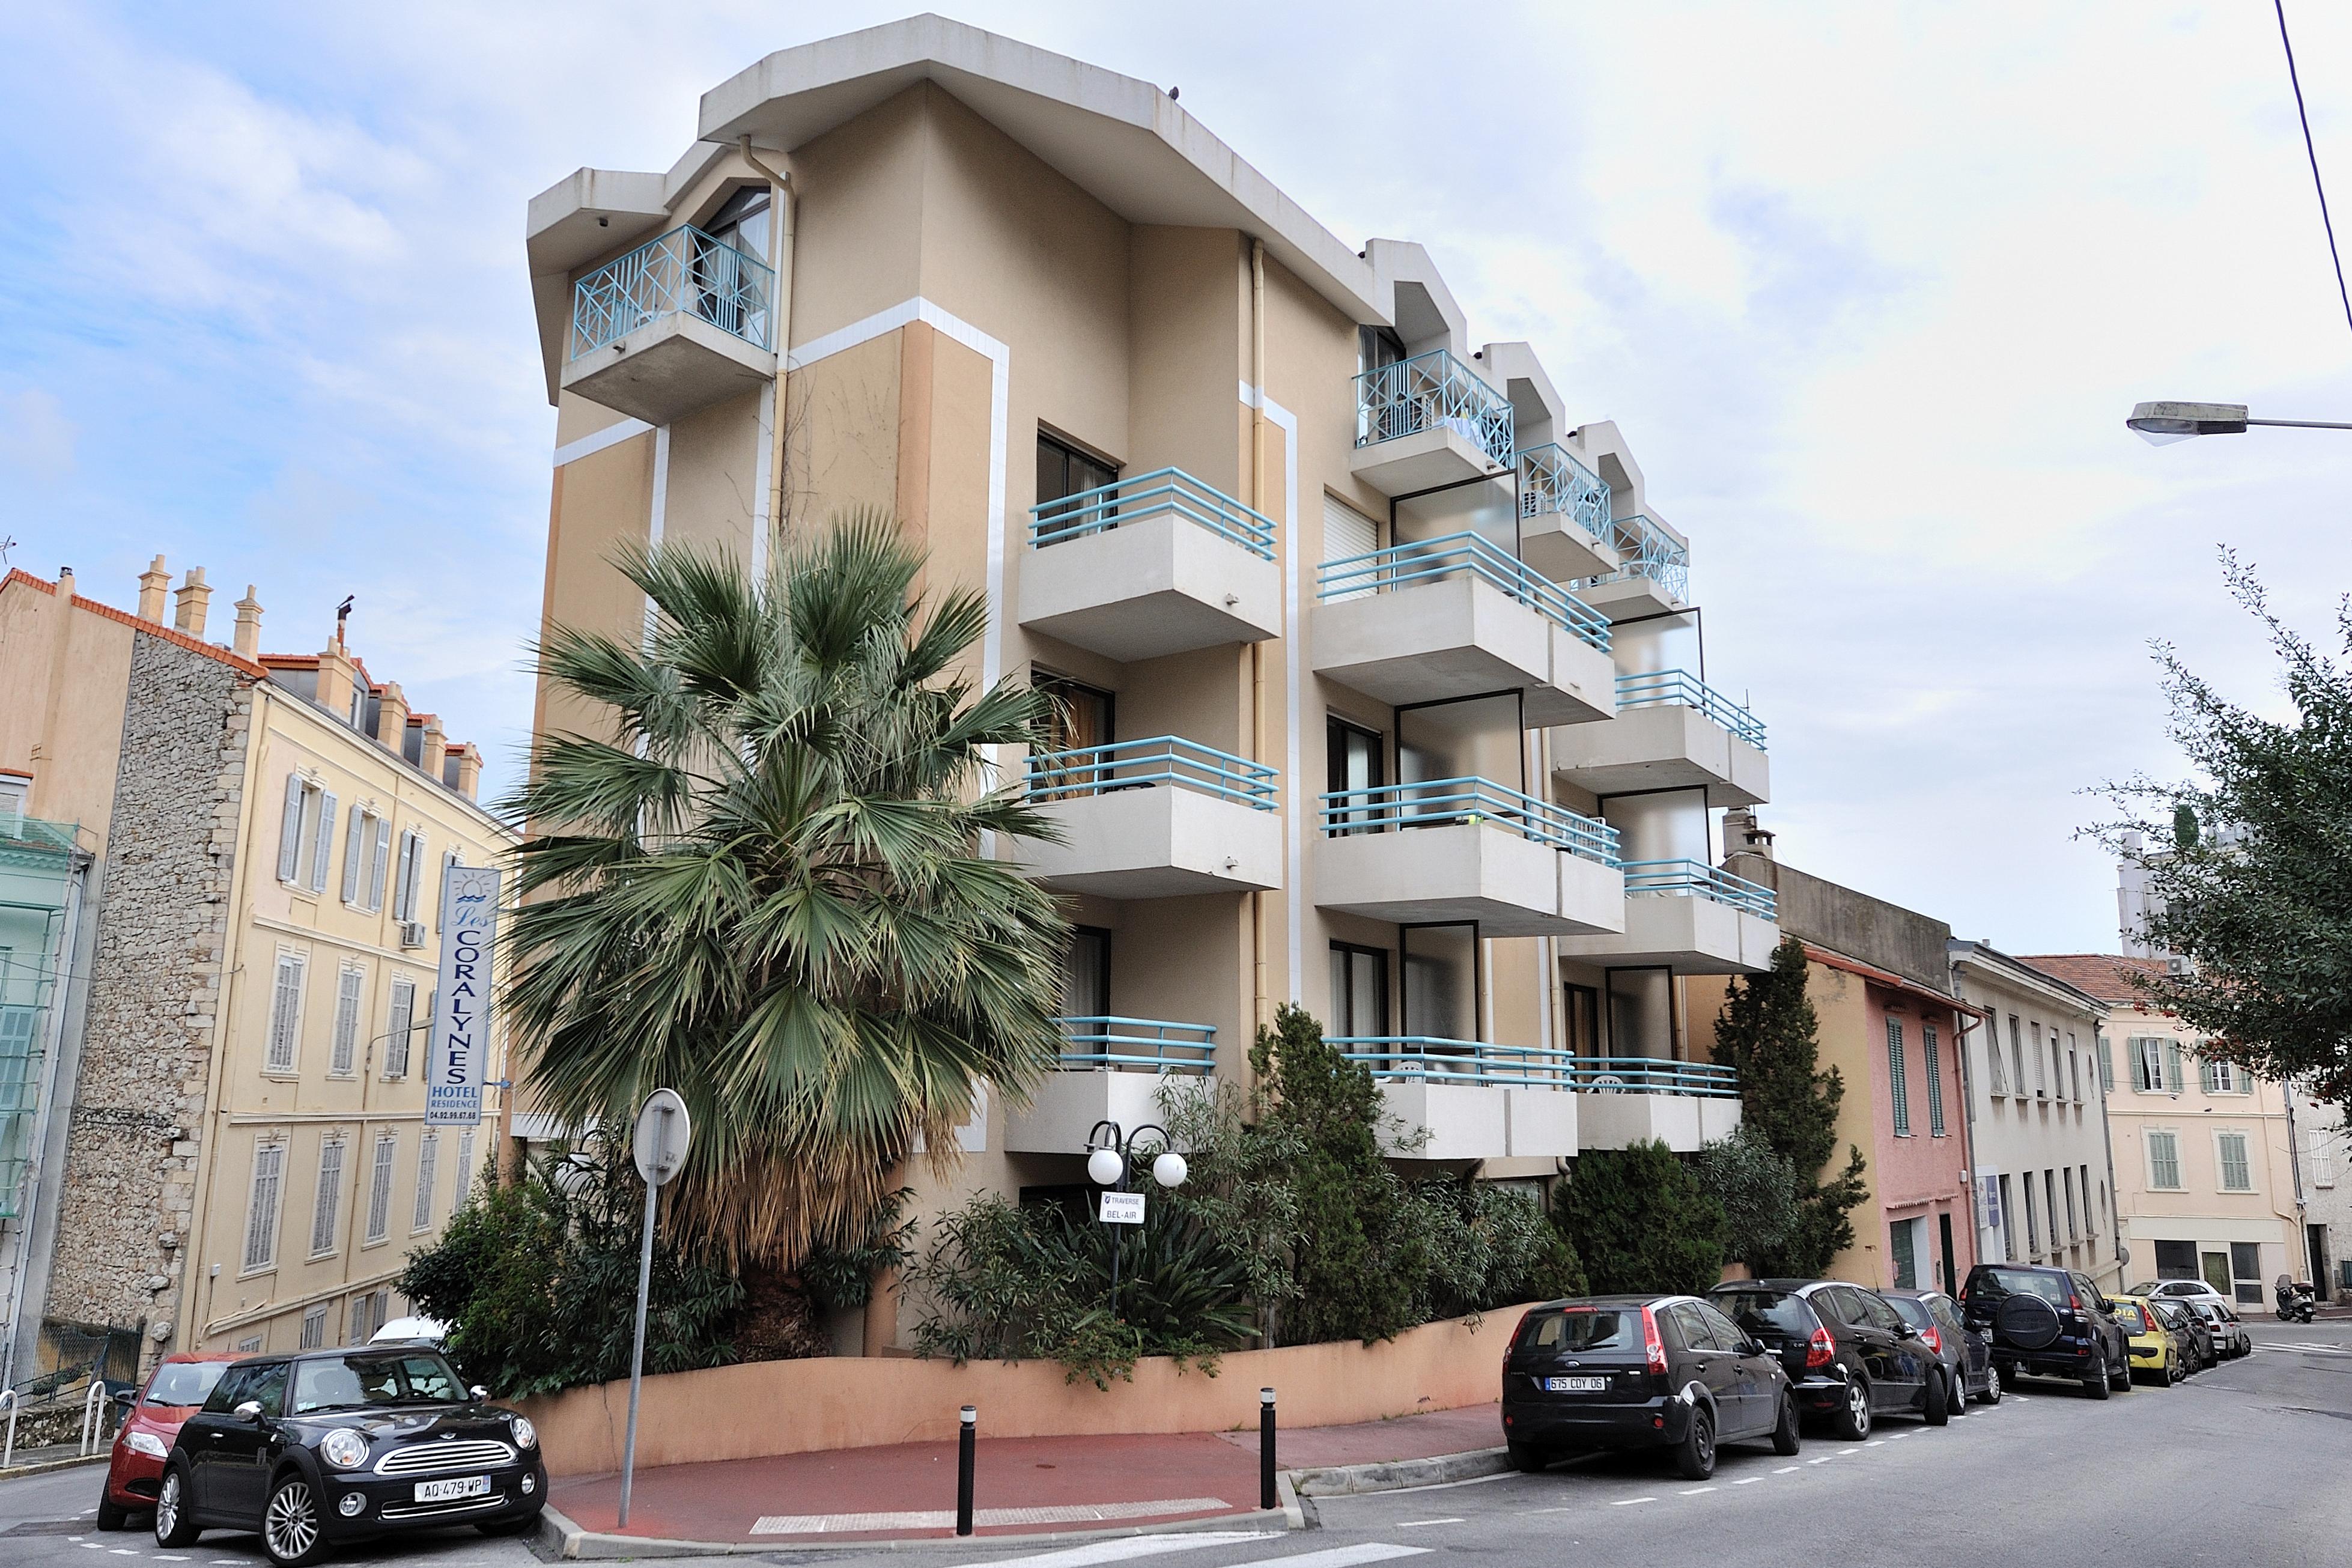 HOTEL RESIDHOTEL LES CORALYNES CANNES 3* (France) - from US$ 95 | BOOKED